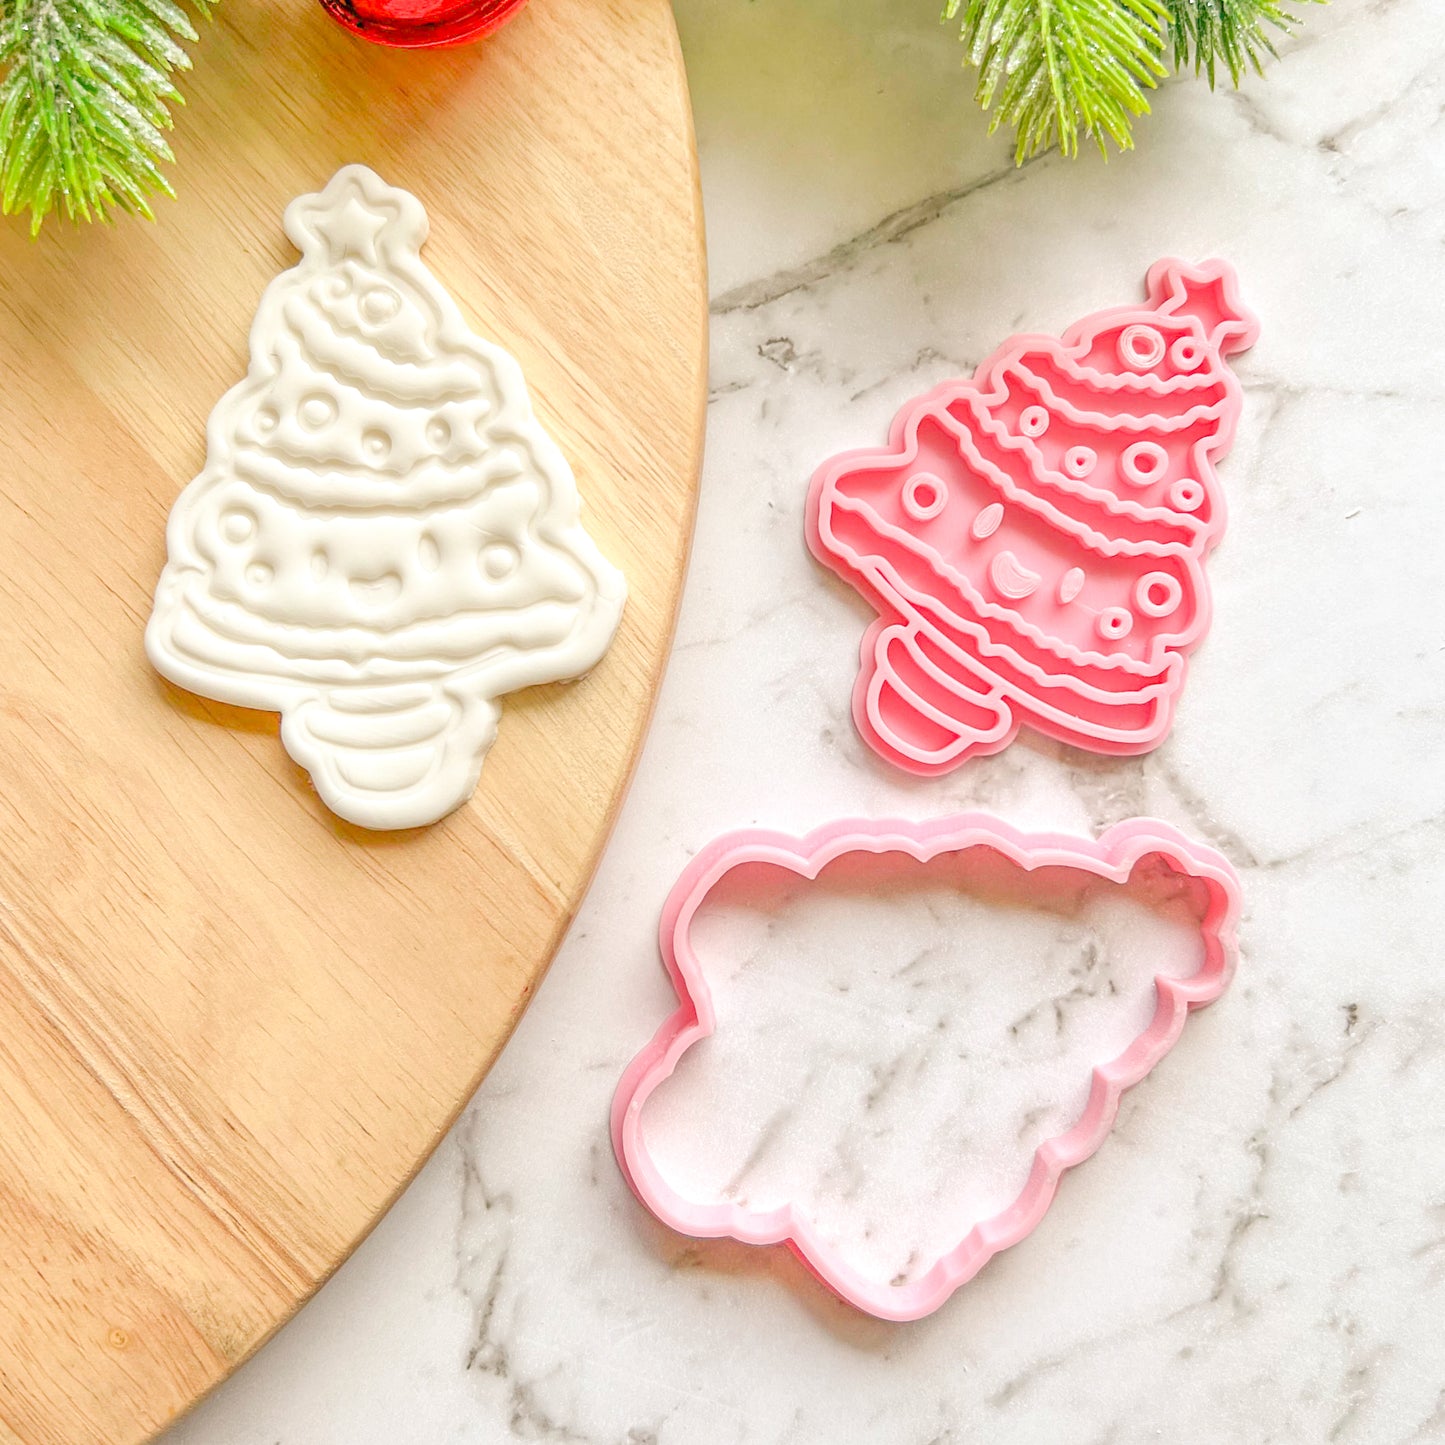 "Decorated Tree" Cookie Cutter & Stamp